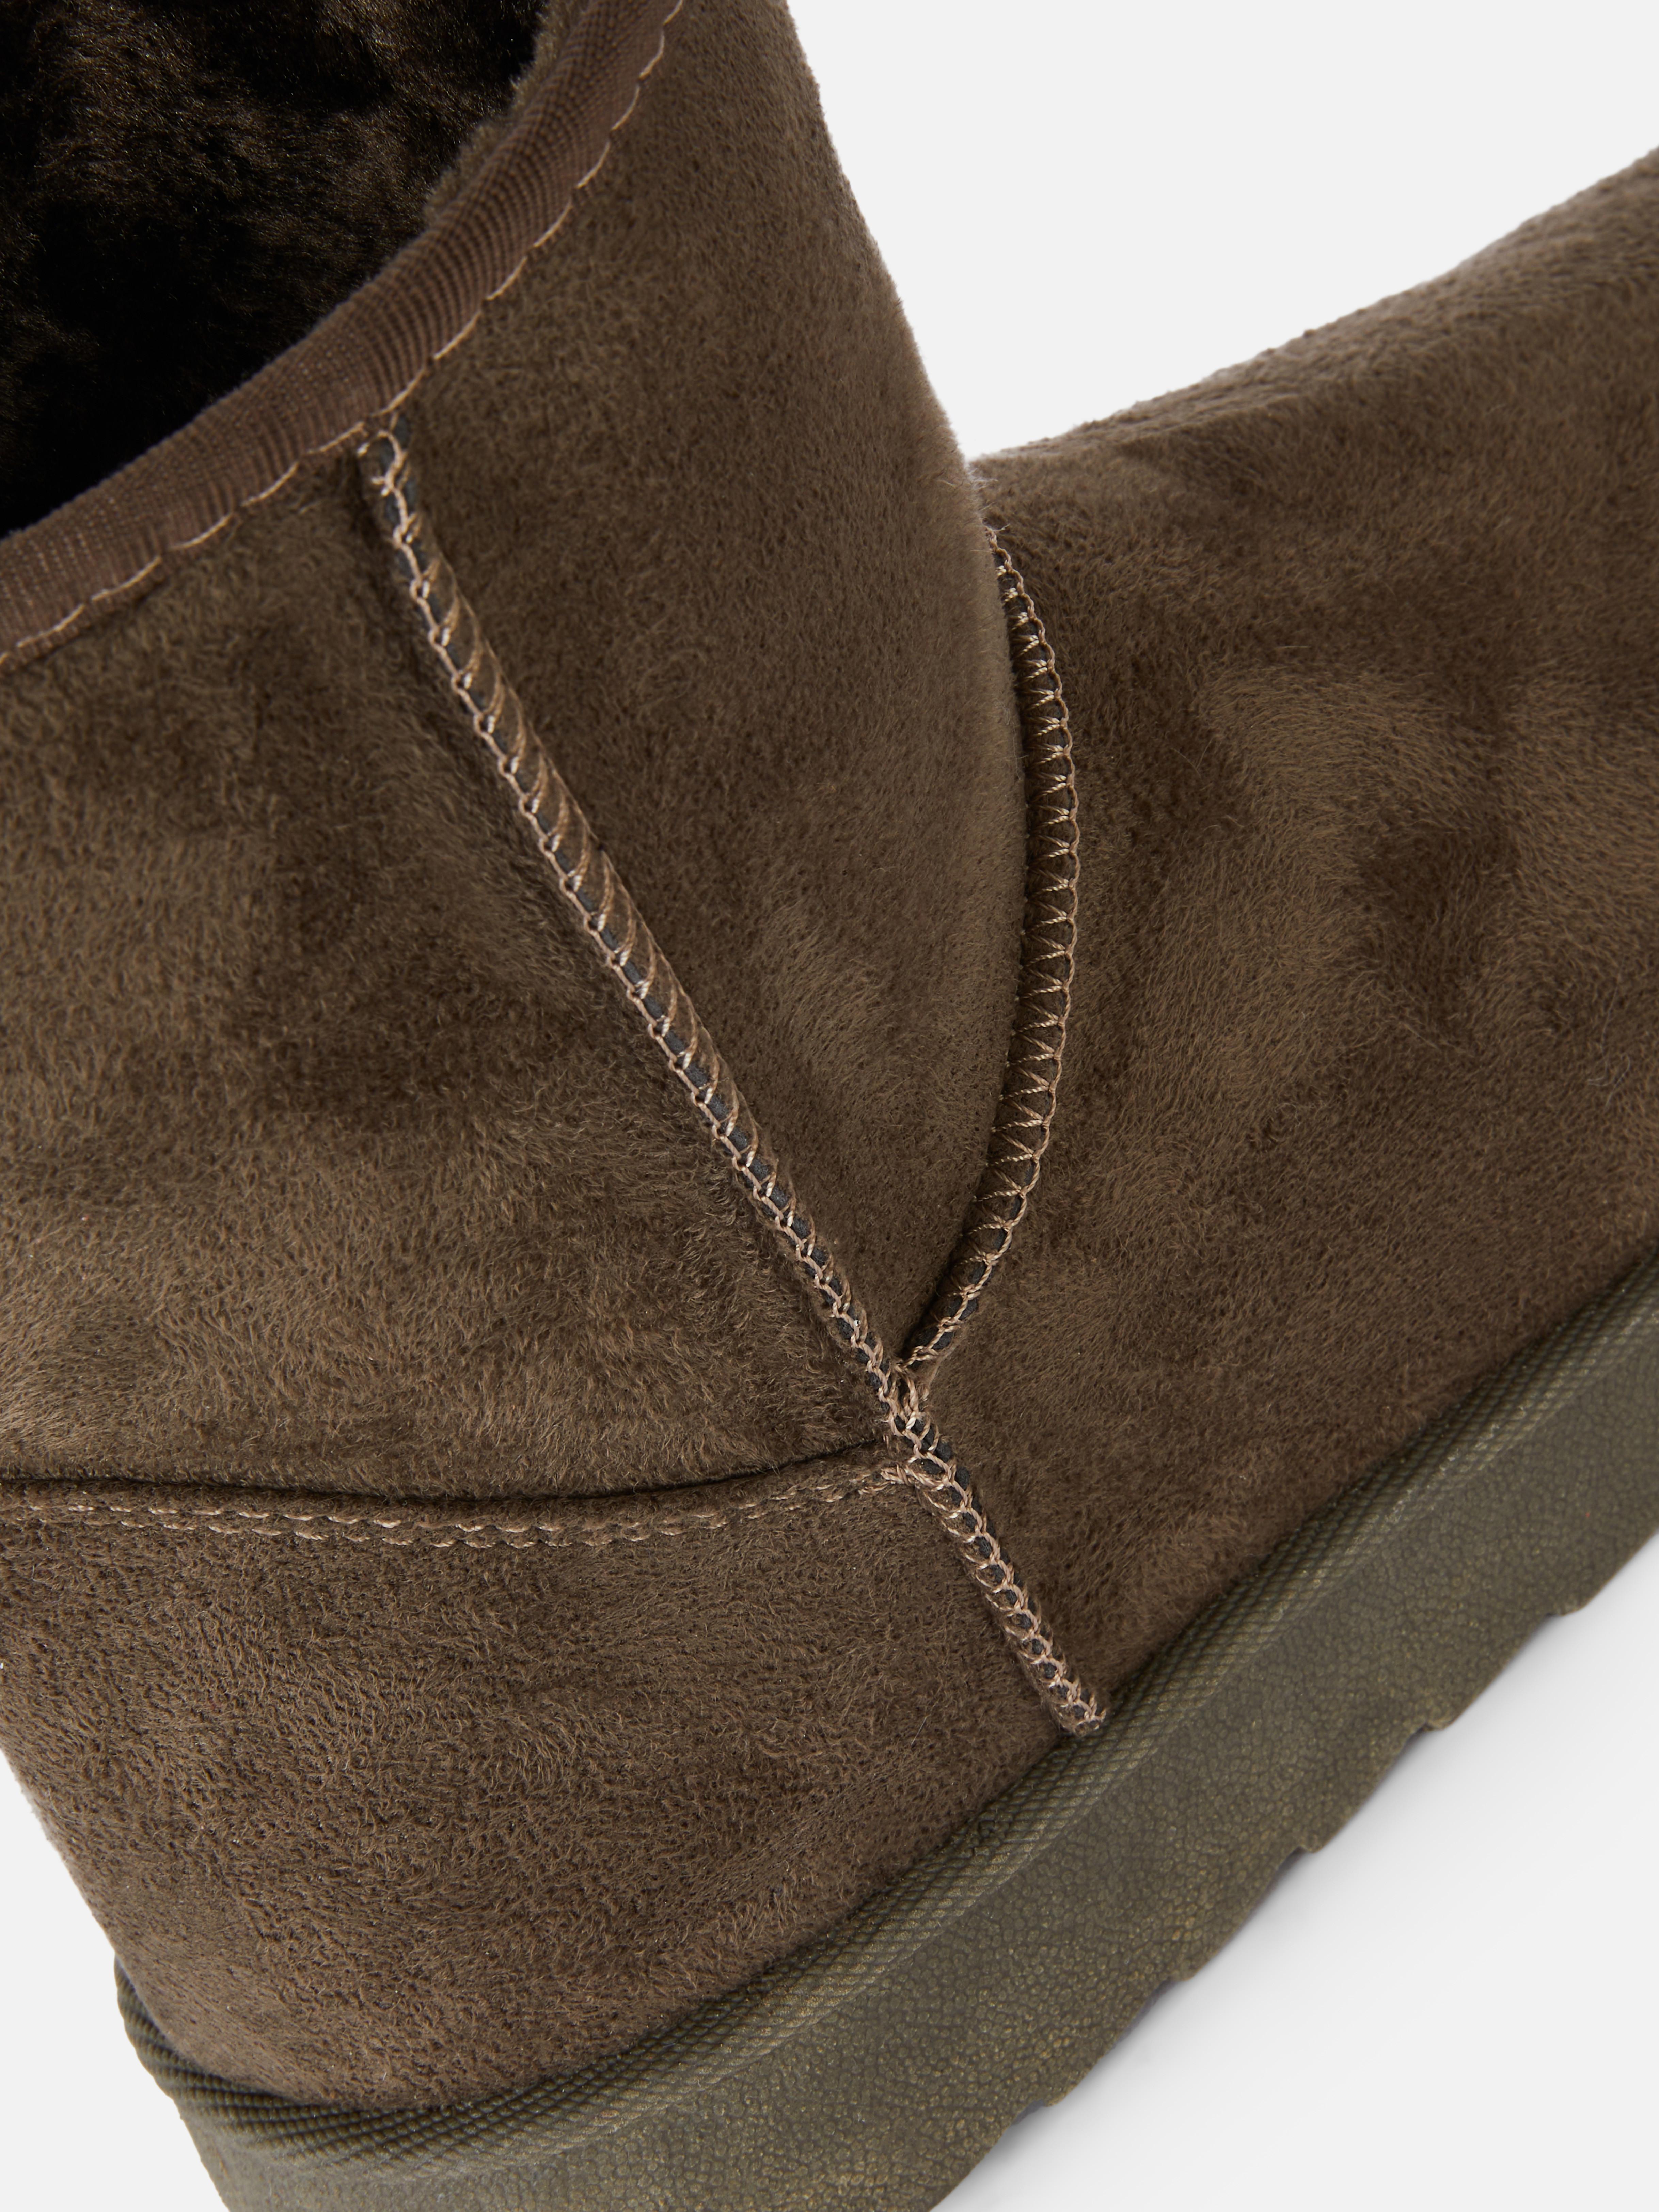 Suede Style Slipper Boot